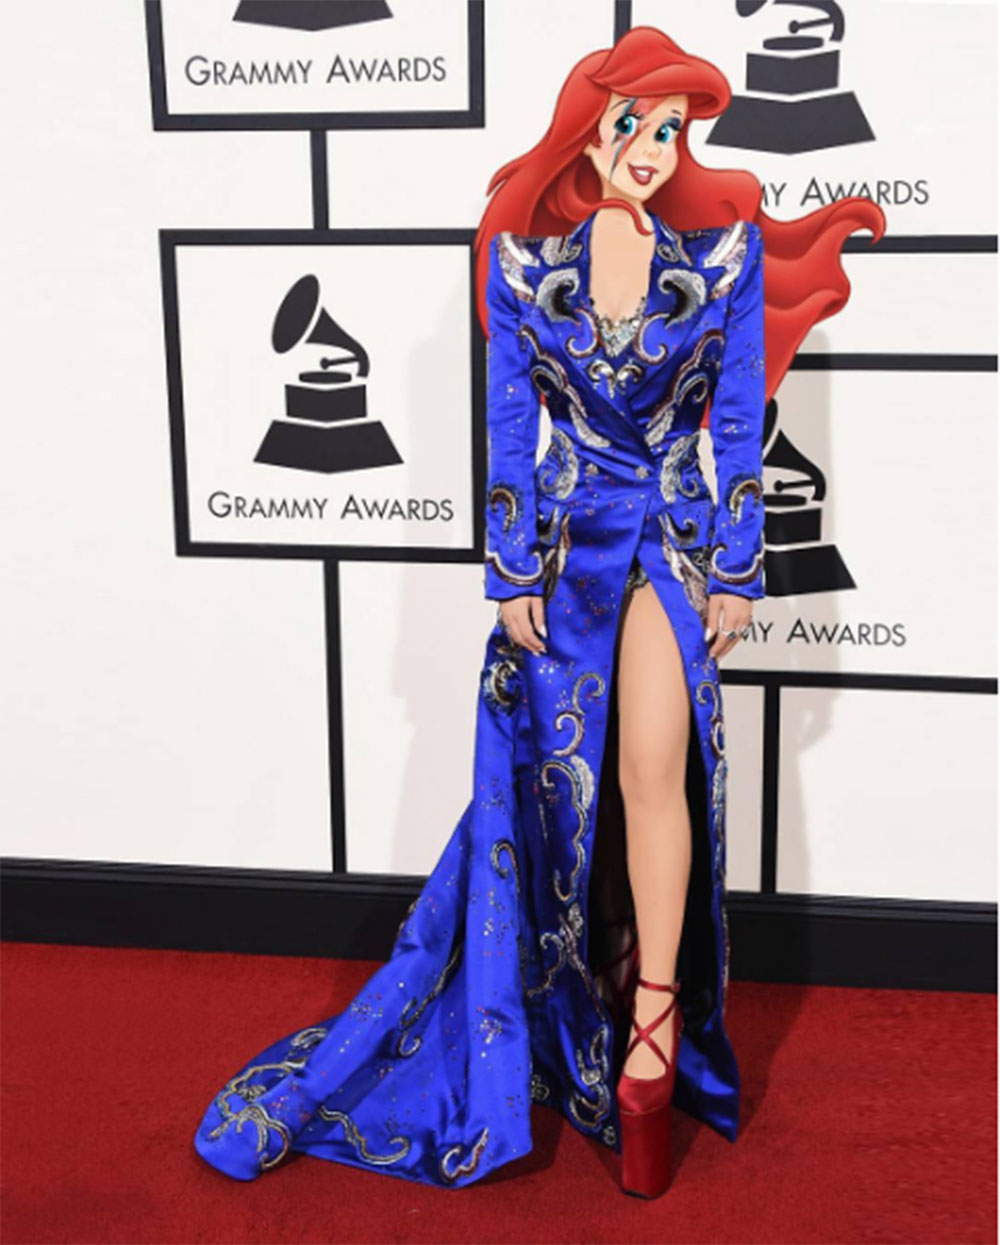 Lady Gaga swaps places with Ariel for her David Bowie tribute at The Grammys.